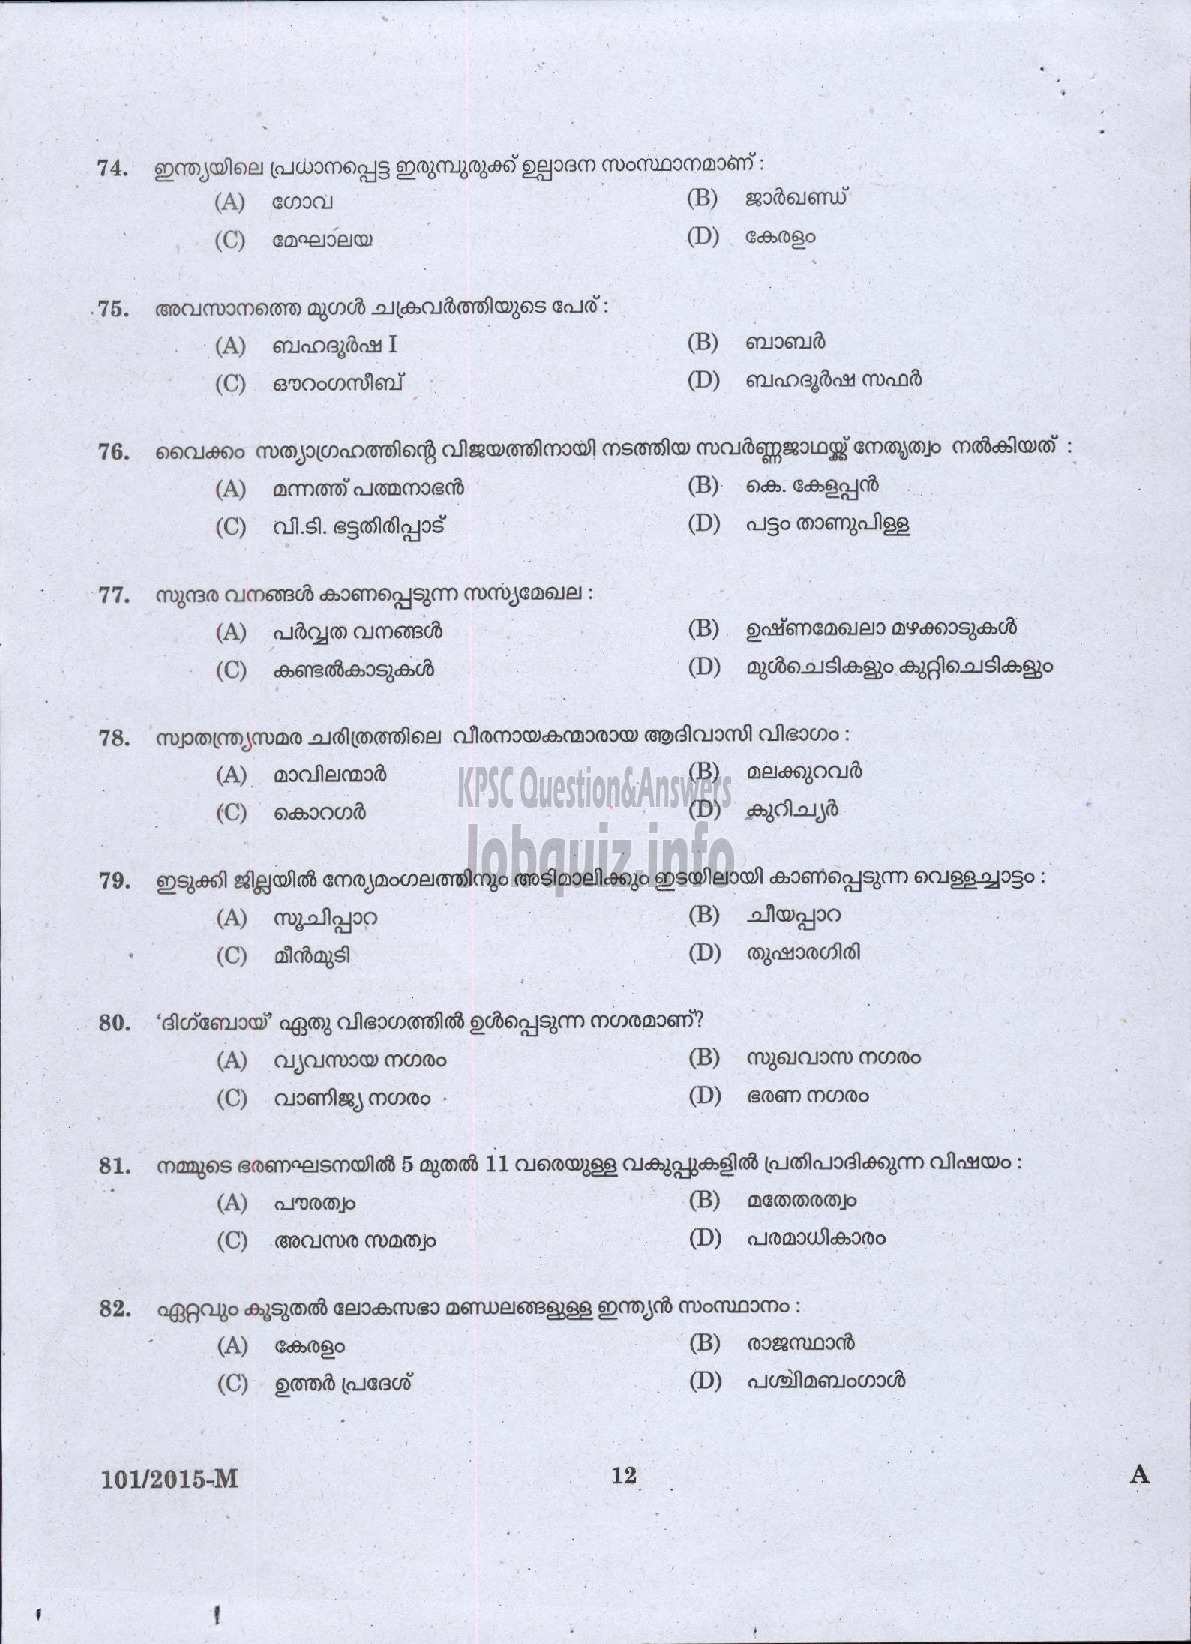 Kerala PSC Question Paper - FIREMAN DRIVER CUM PUMP OPERATOR TRAINEE FIRE AND RESCUE SERVICES ( Malayalam ) -10